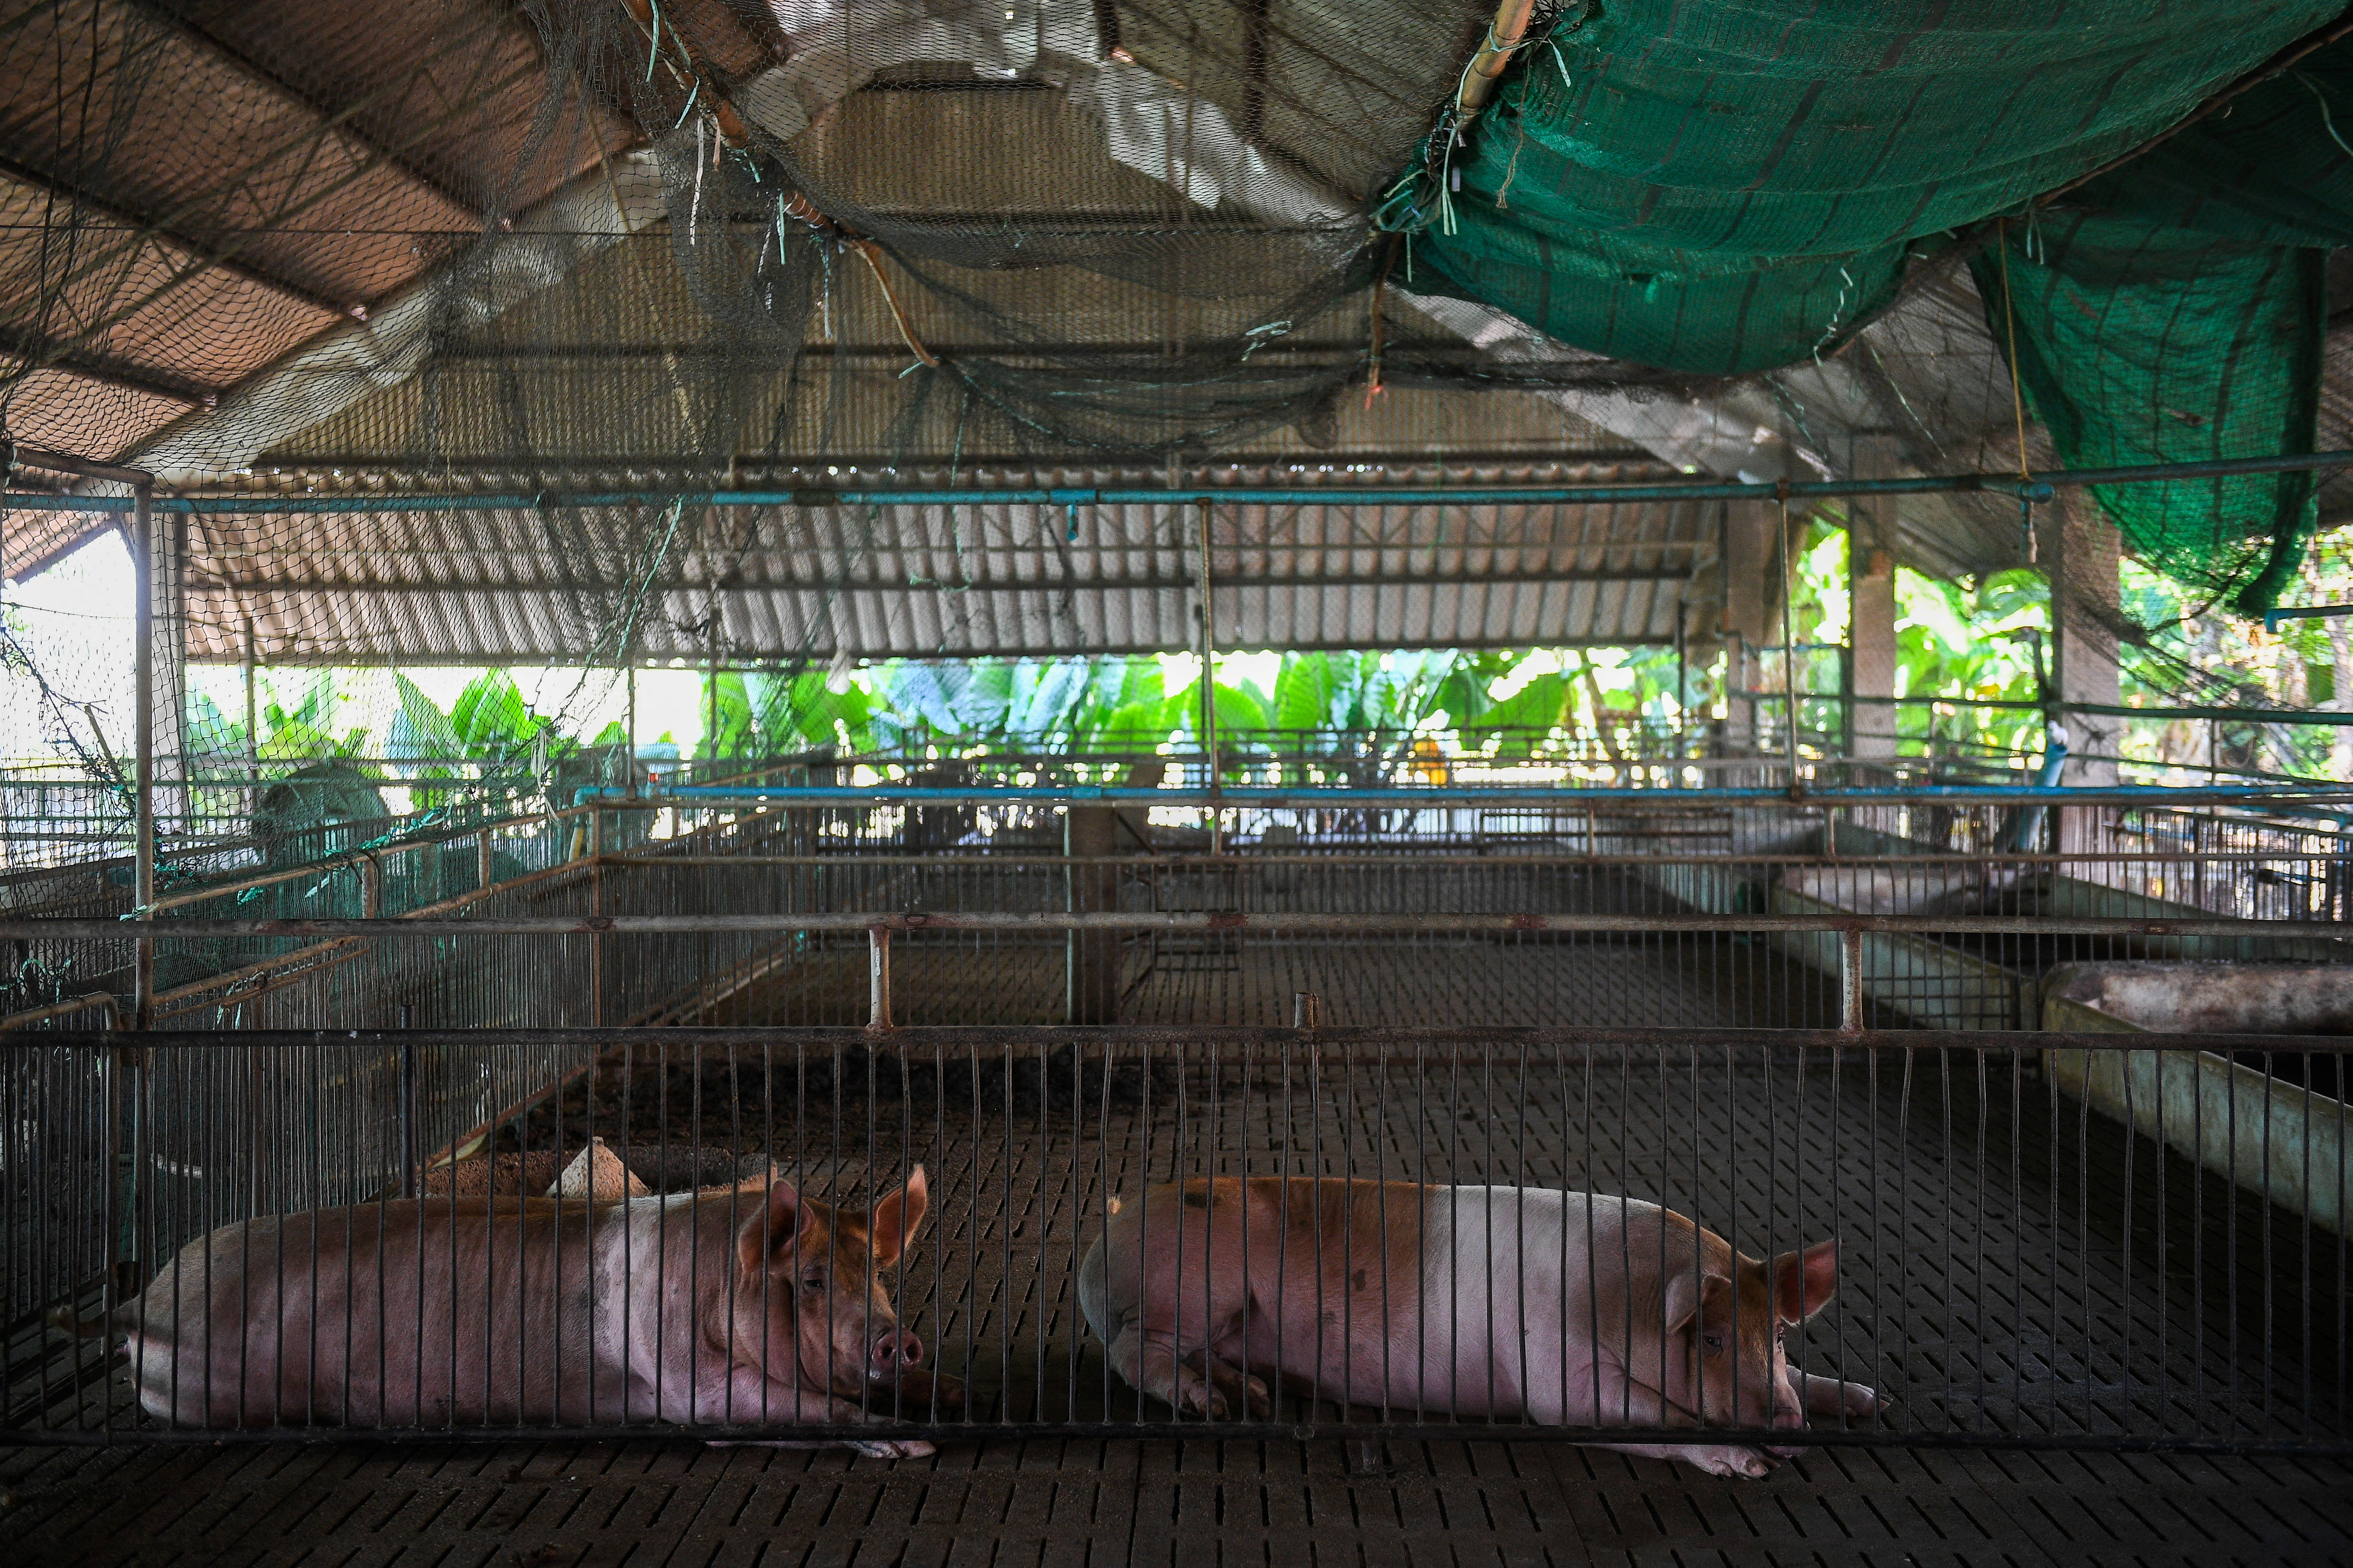 Thailand's pig farms ravaged by suspected African swine fever